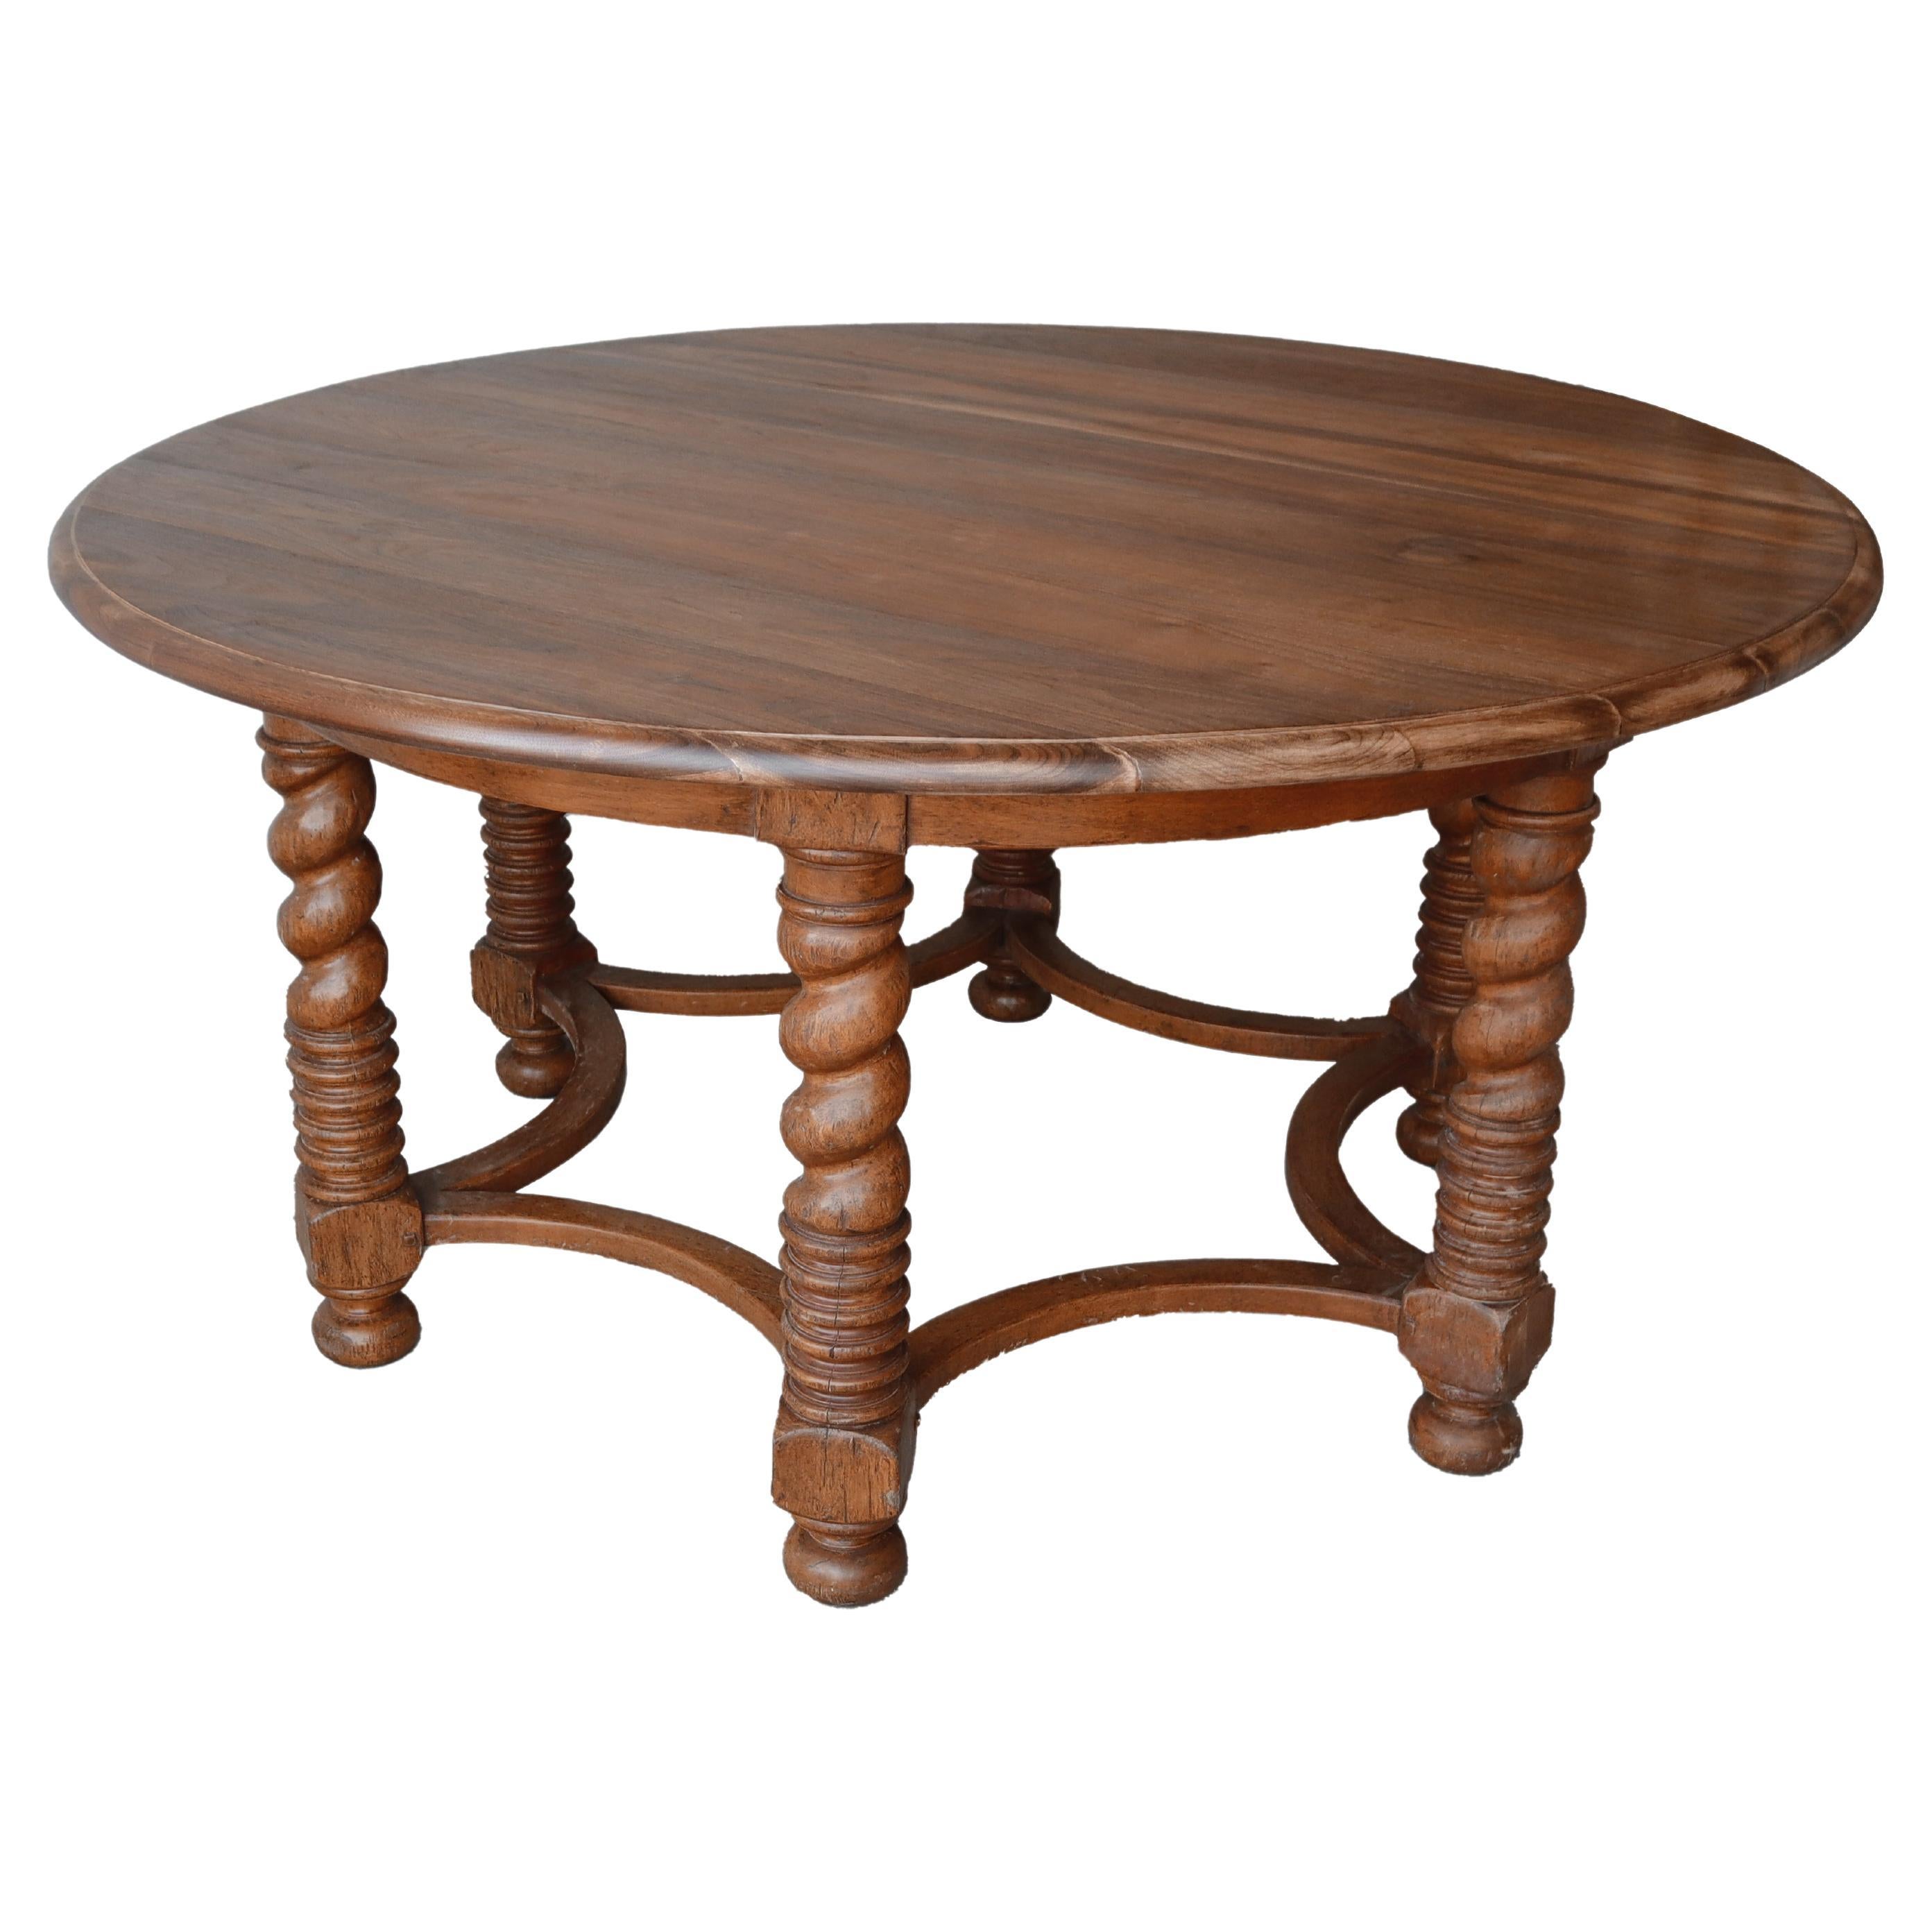 5ft Round European Walnut Barley Twist Dining Table For Sale